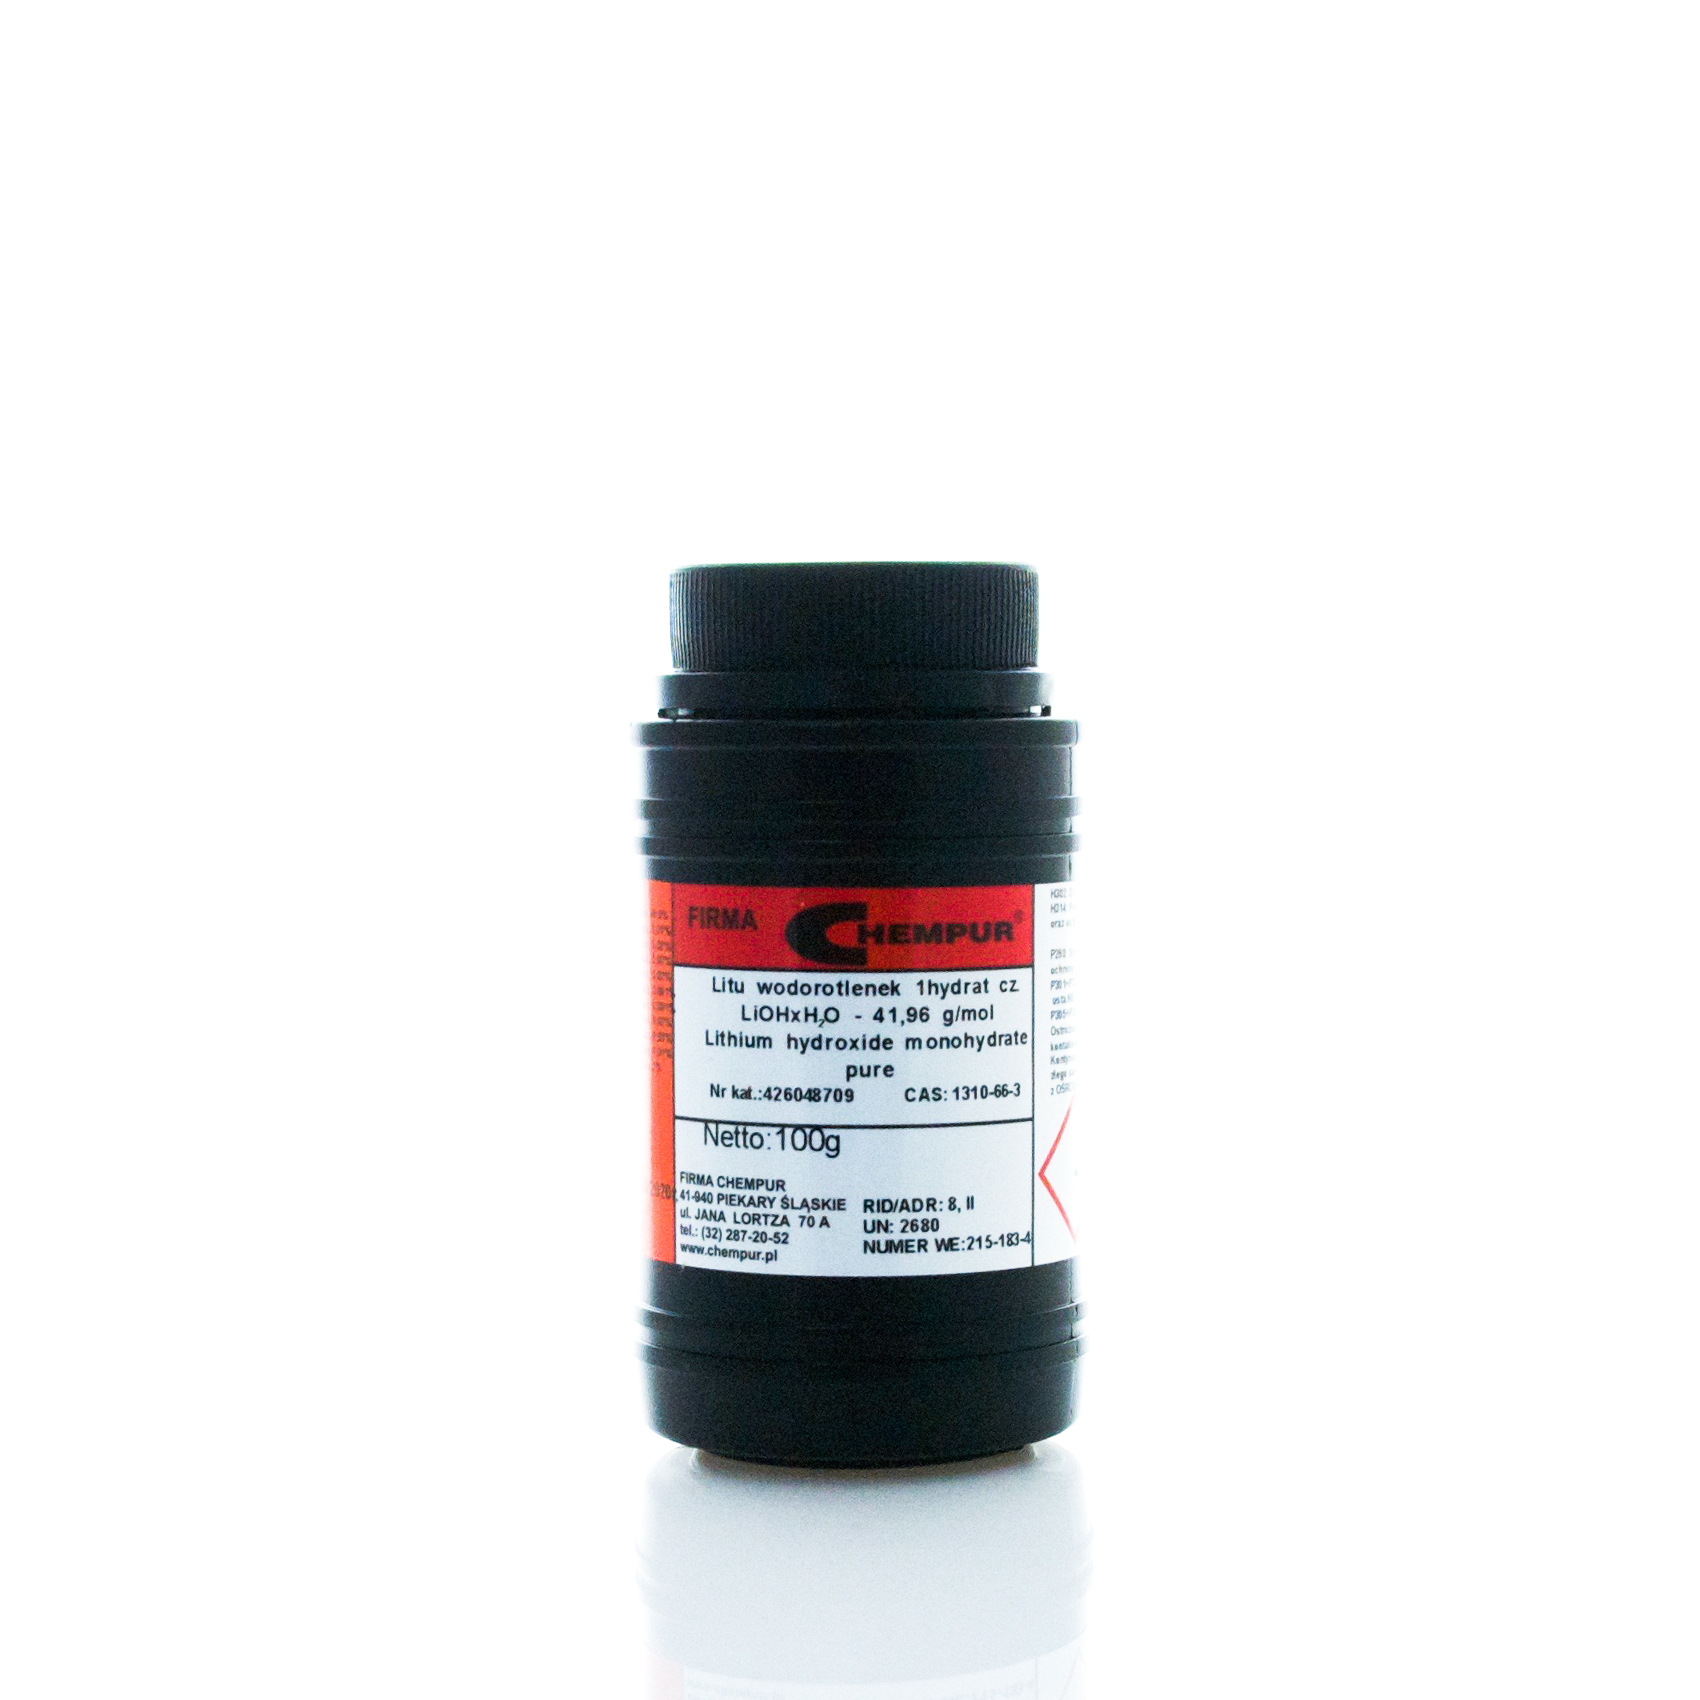 Lithium hydroxide monohydrate pure